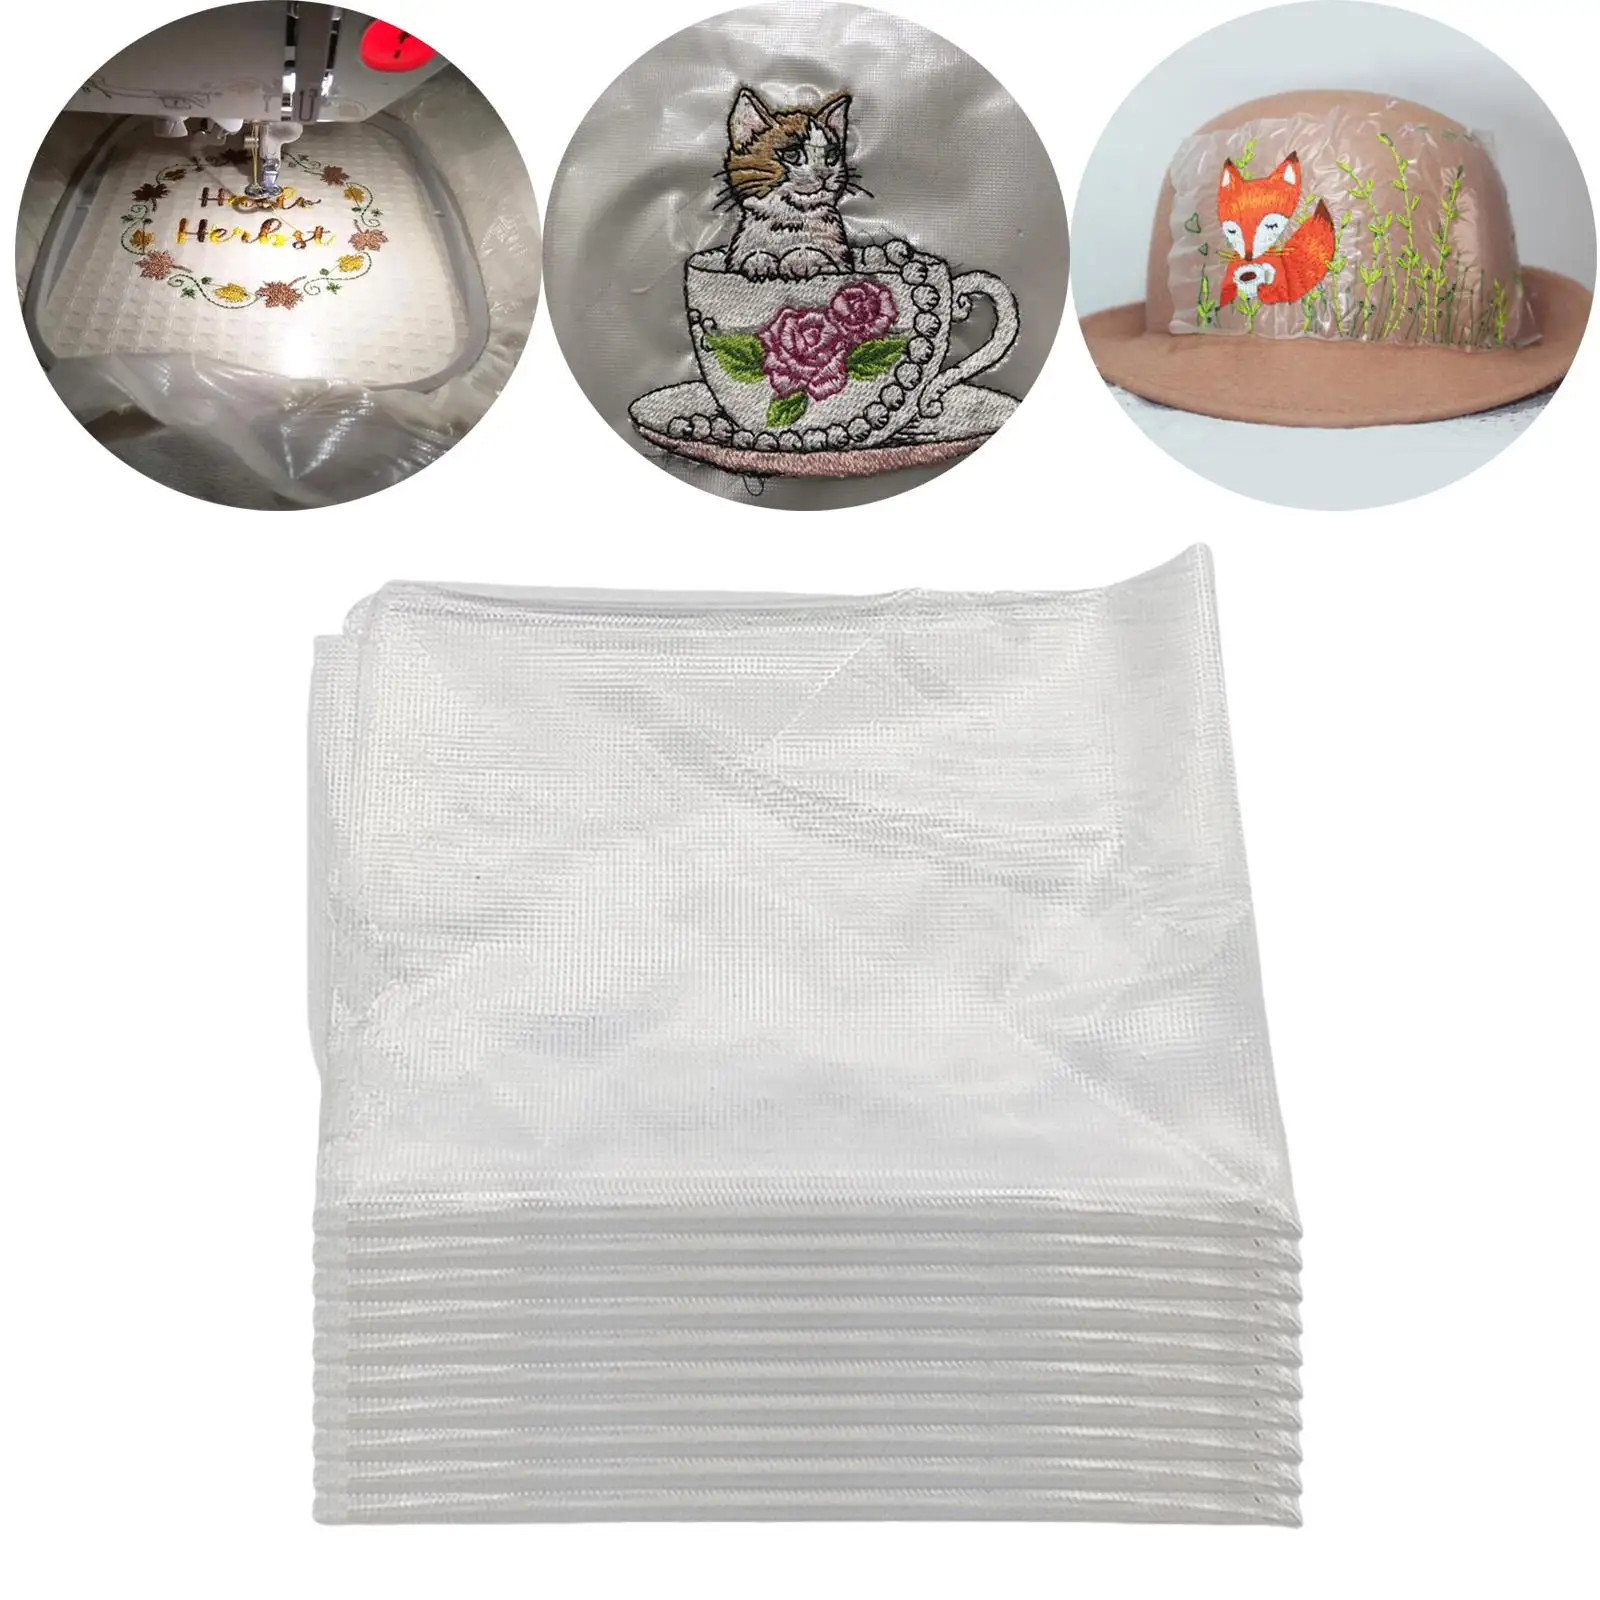 Water Soluble Embroidery Stabilizer Dissolvable Paper Sewing for Sheets